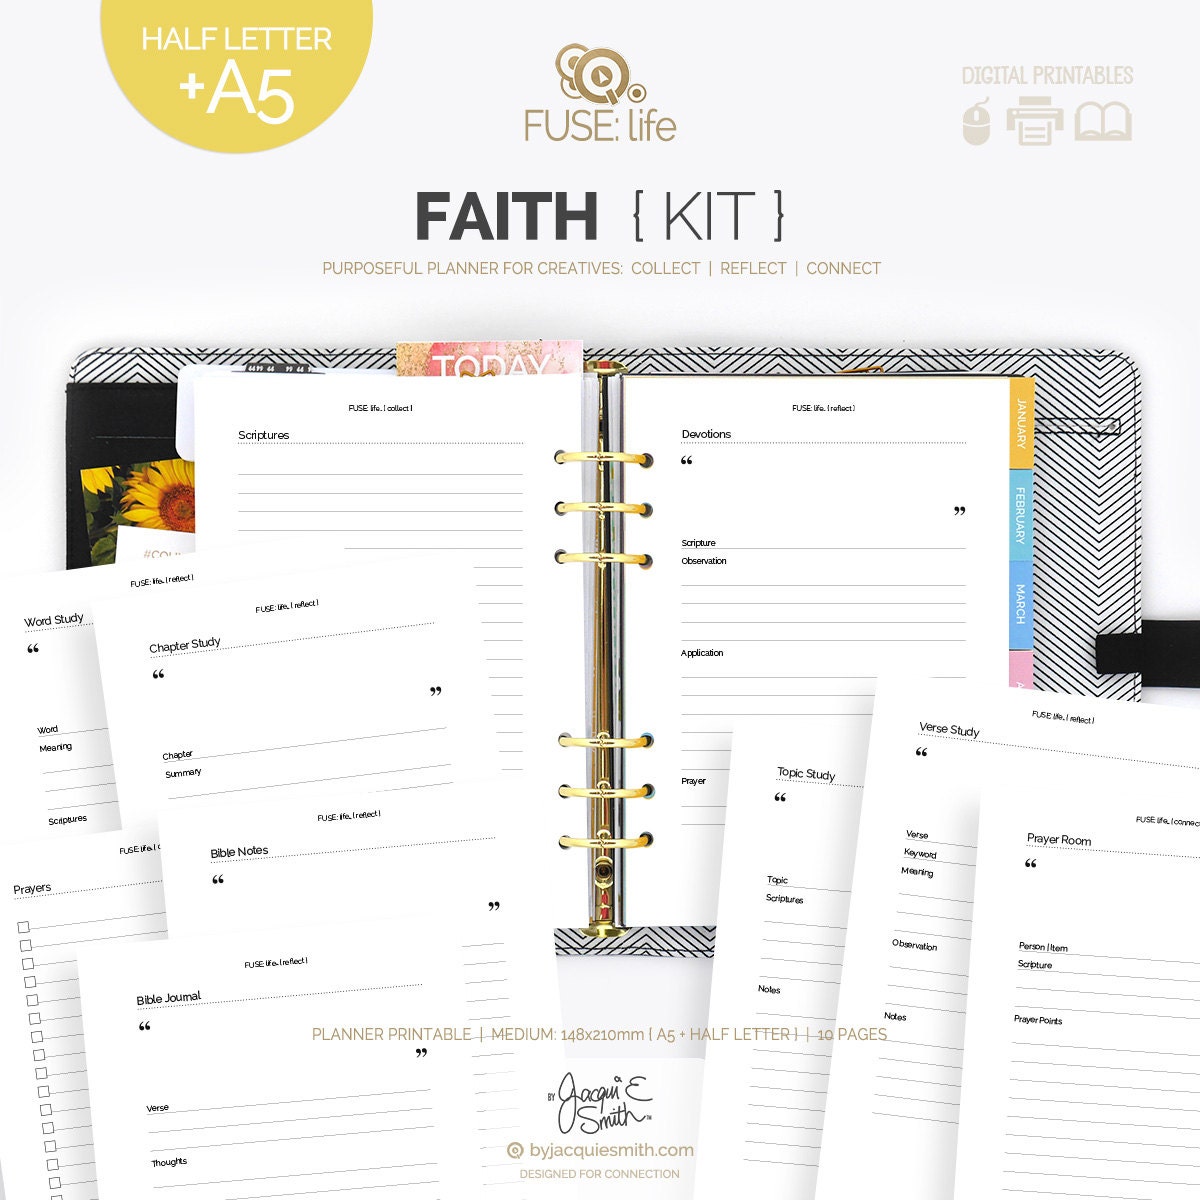 m-fuse-life-faith-kit-planner-printable-inserts-bible